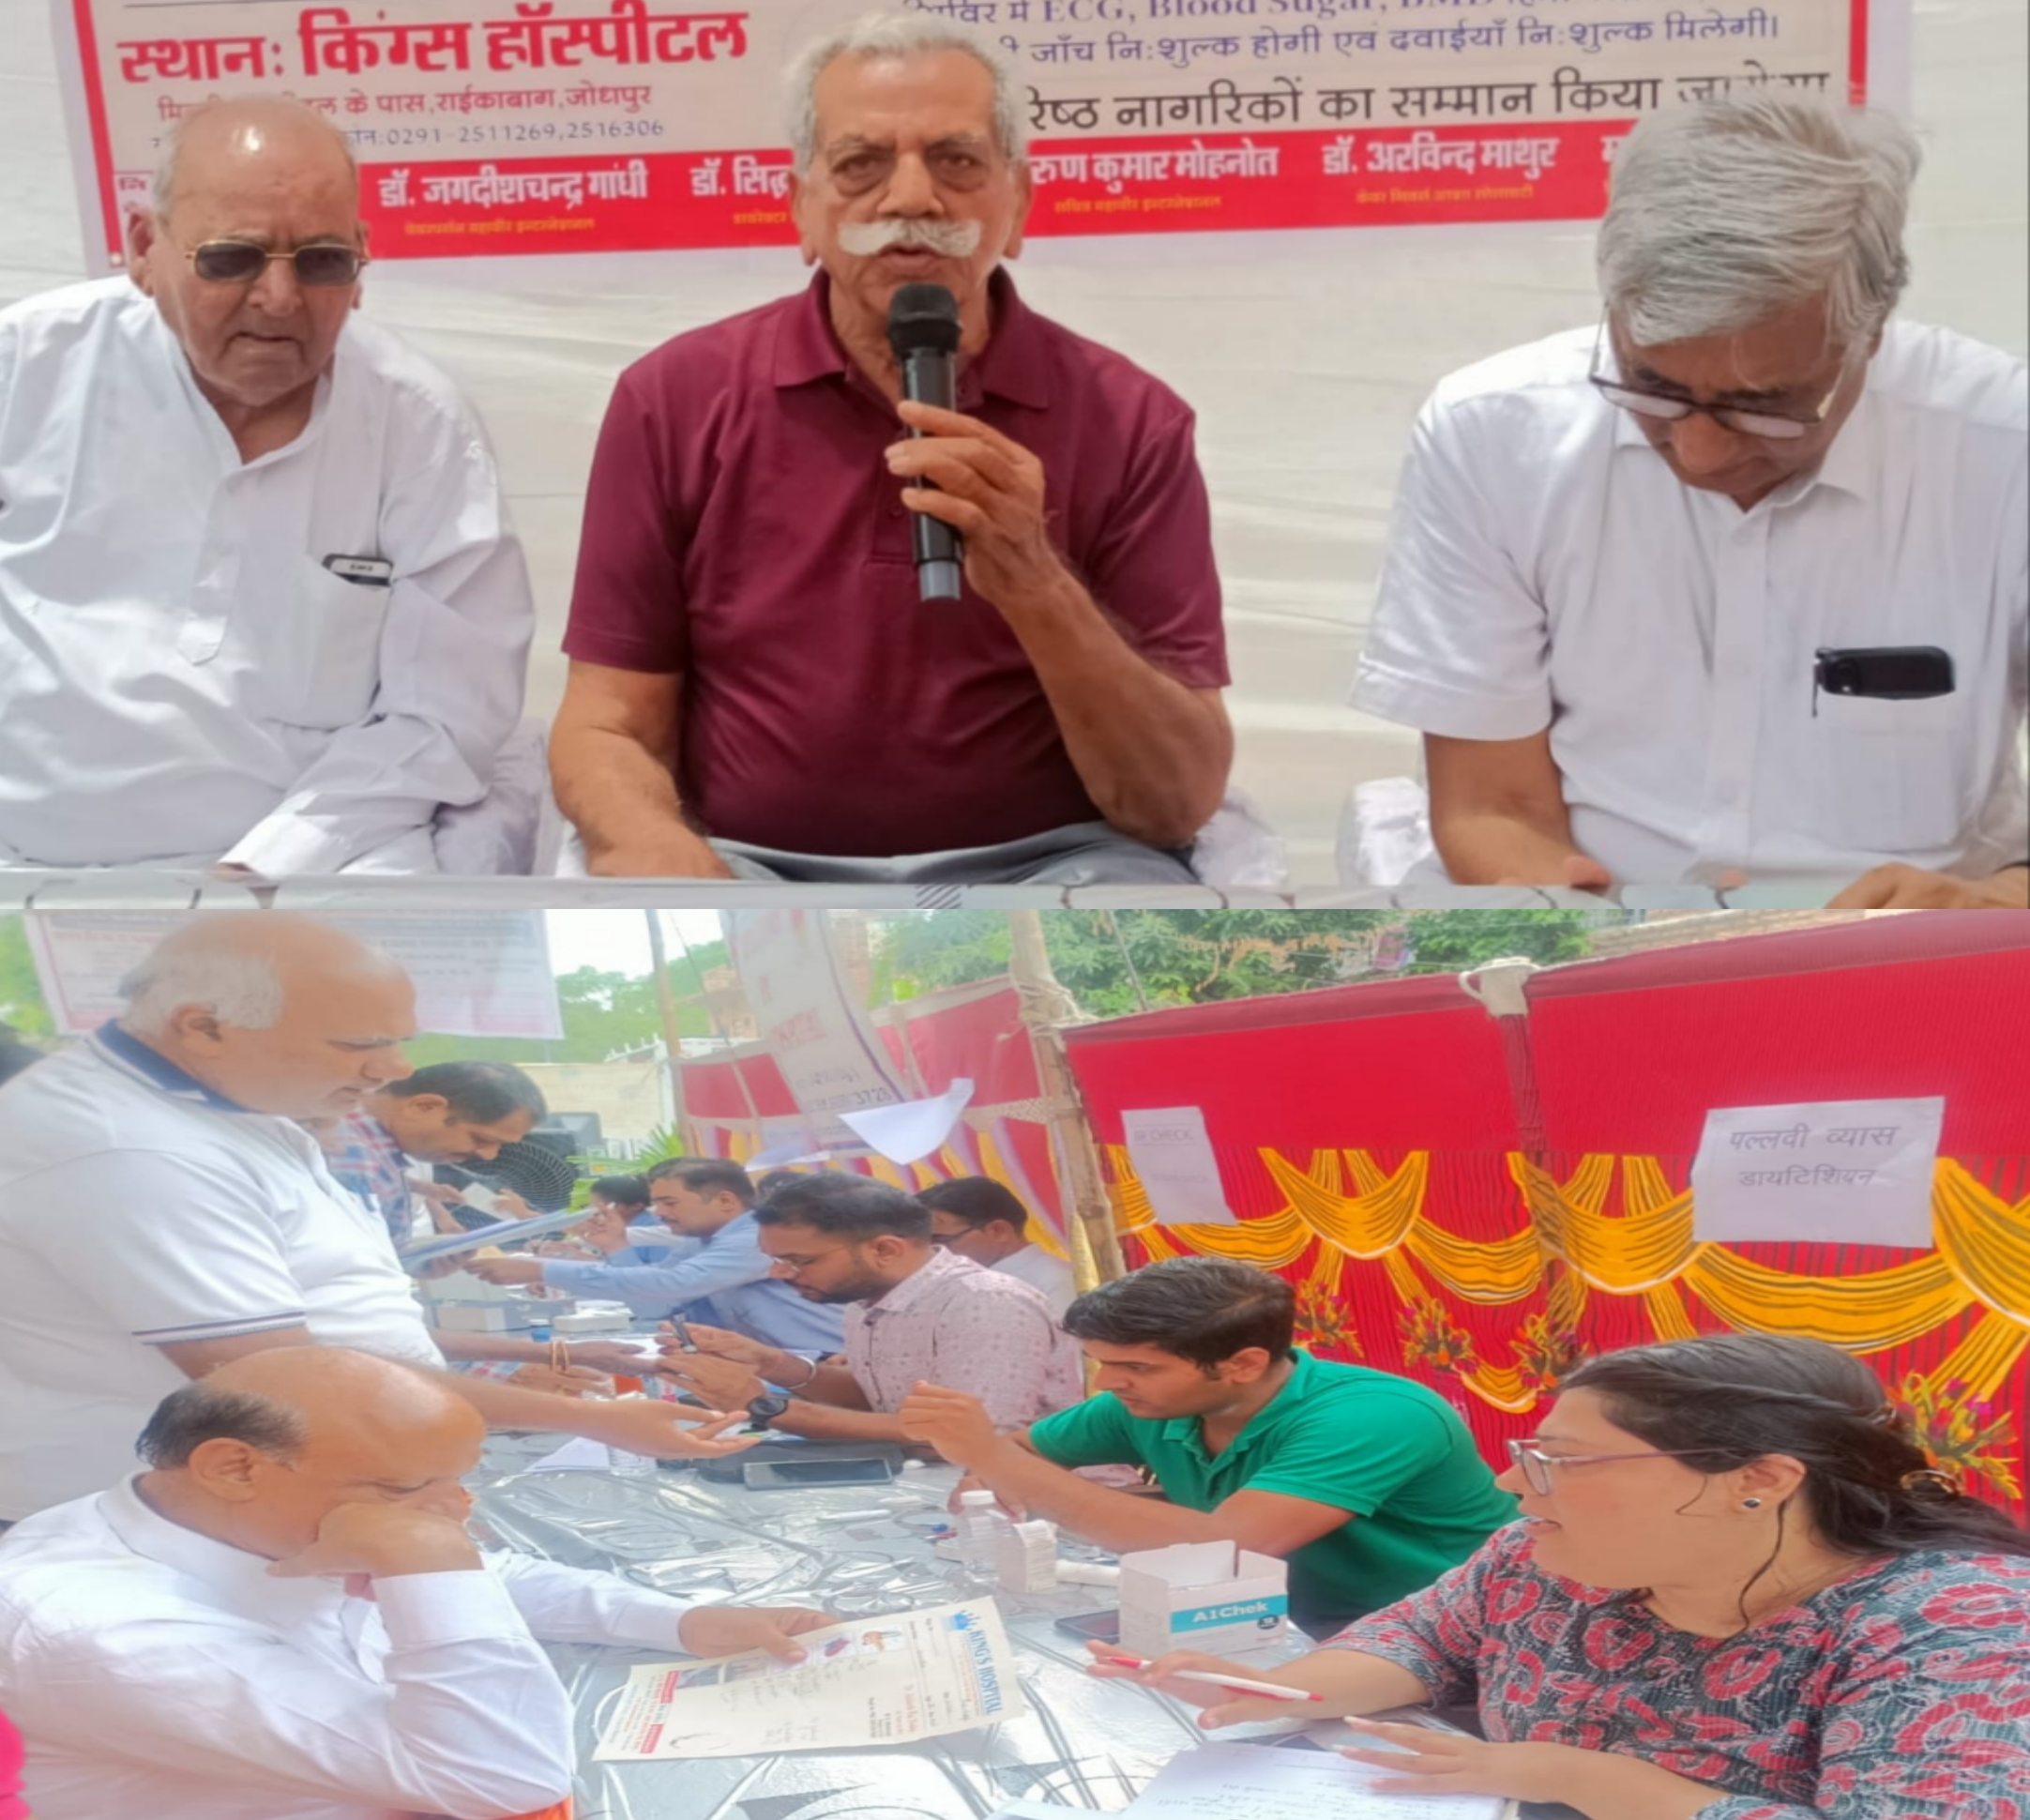 free-multispeciality-medical-camp-organized-on-world-old-age-day